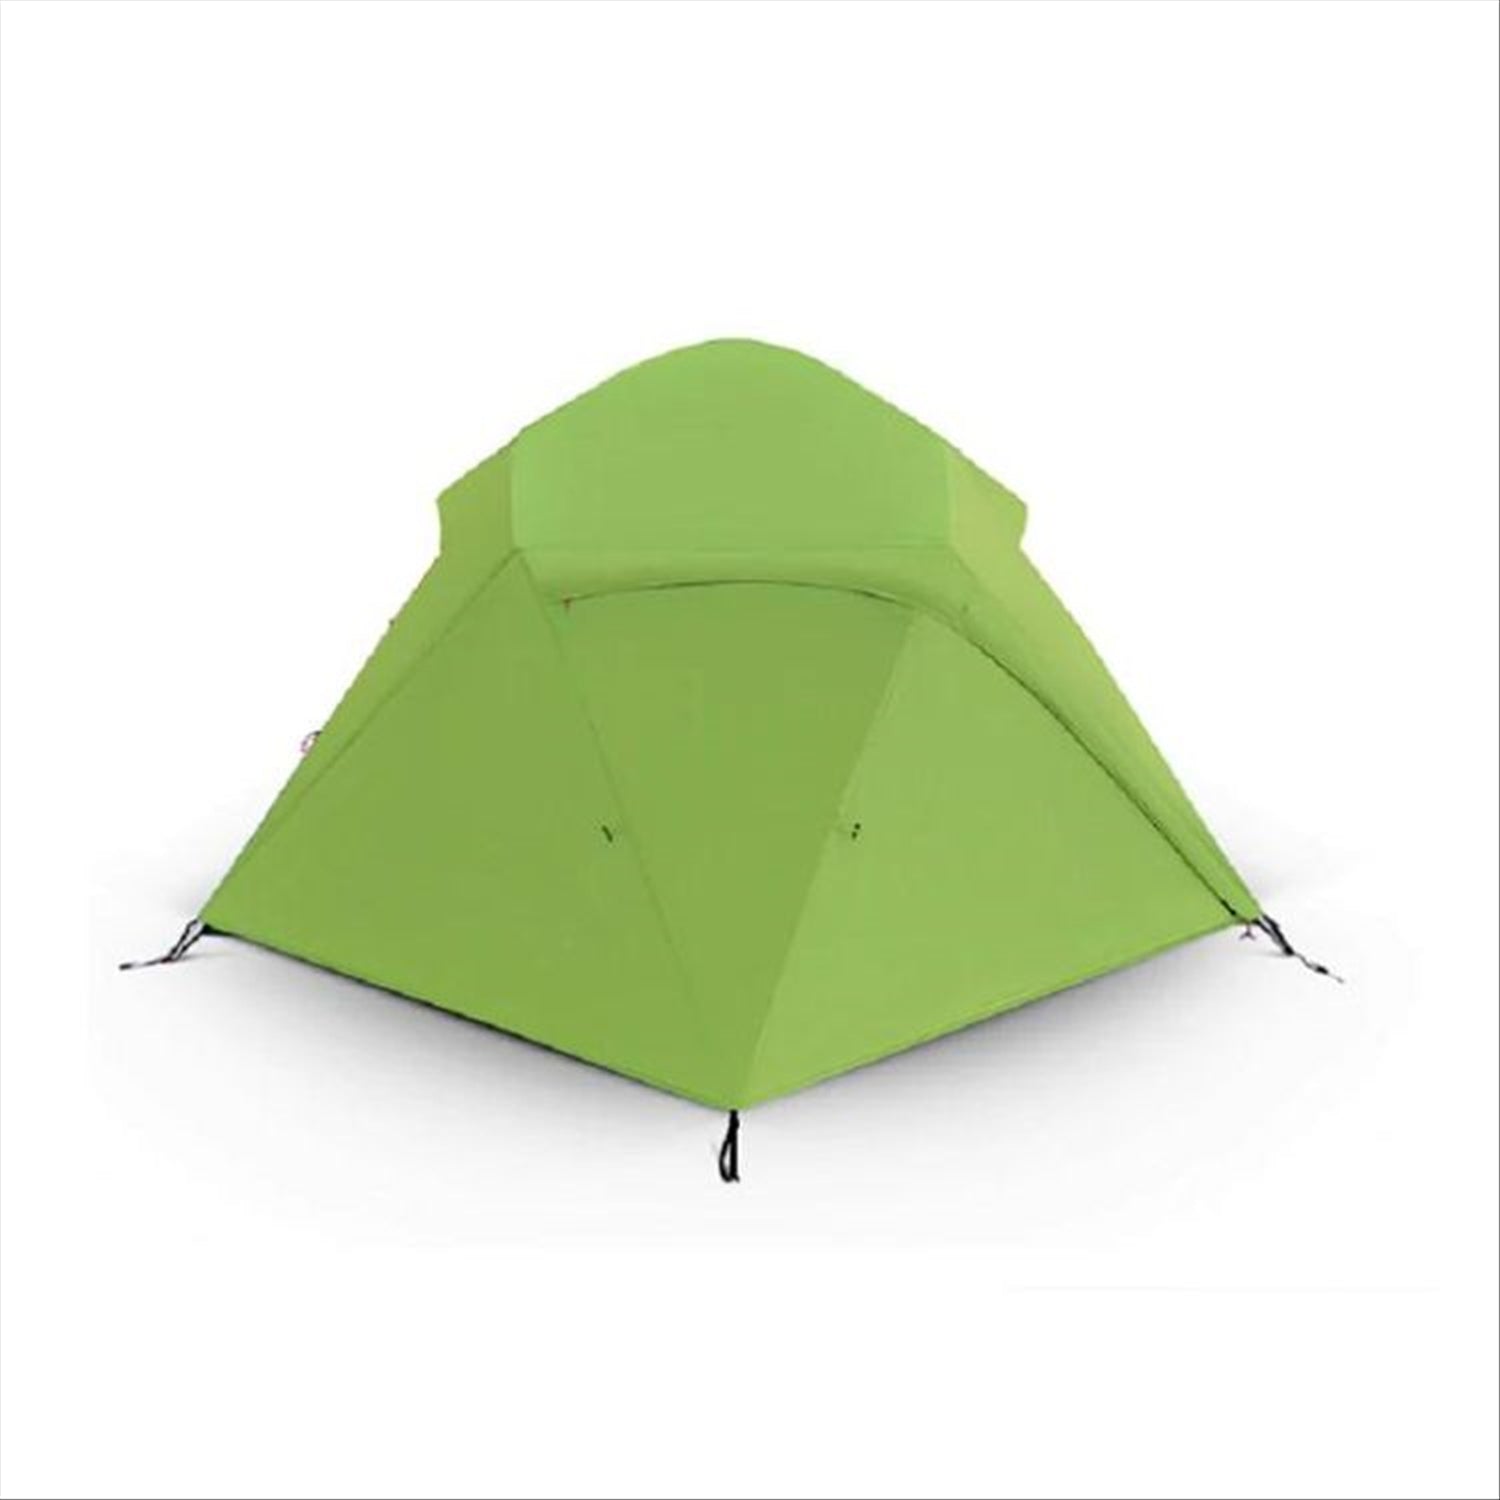 Titan 2 - 'All Weather Series' Camping Tent, 2 Person, 3.3kg